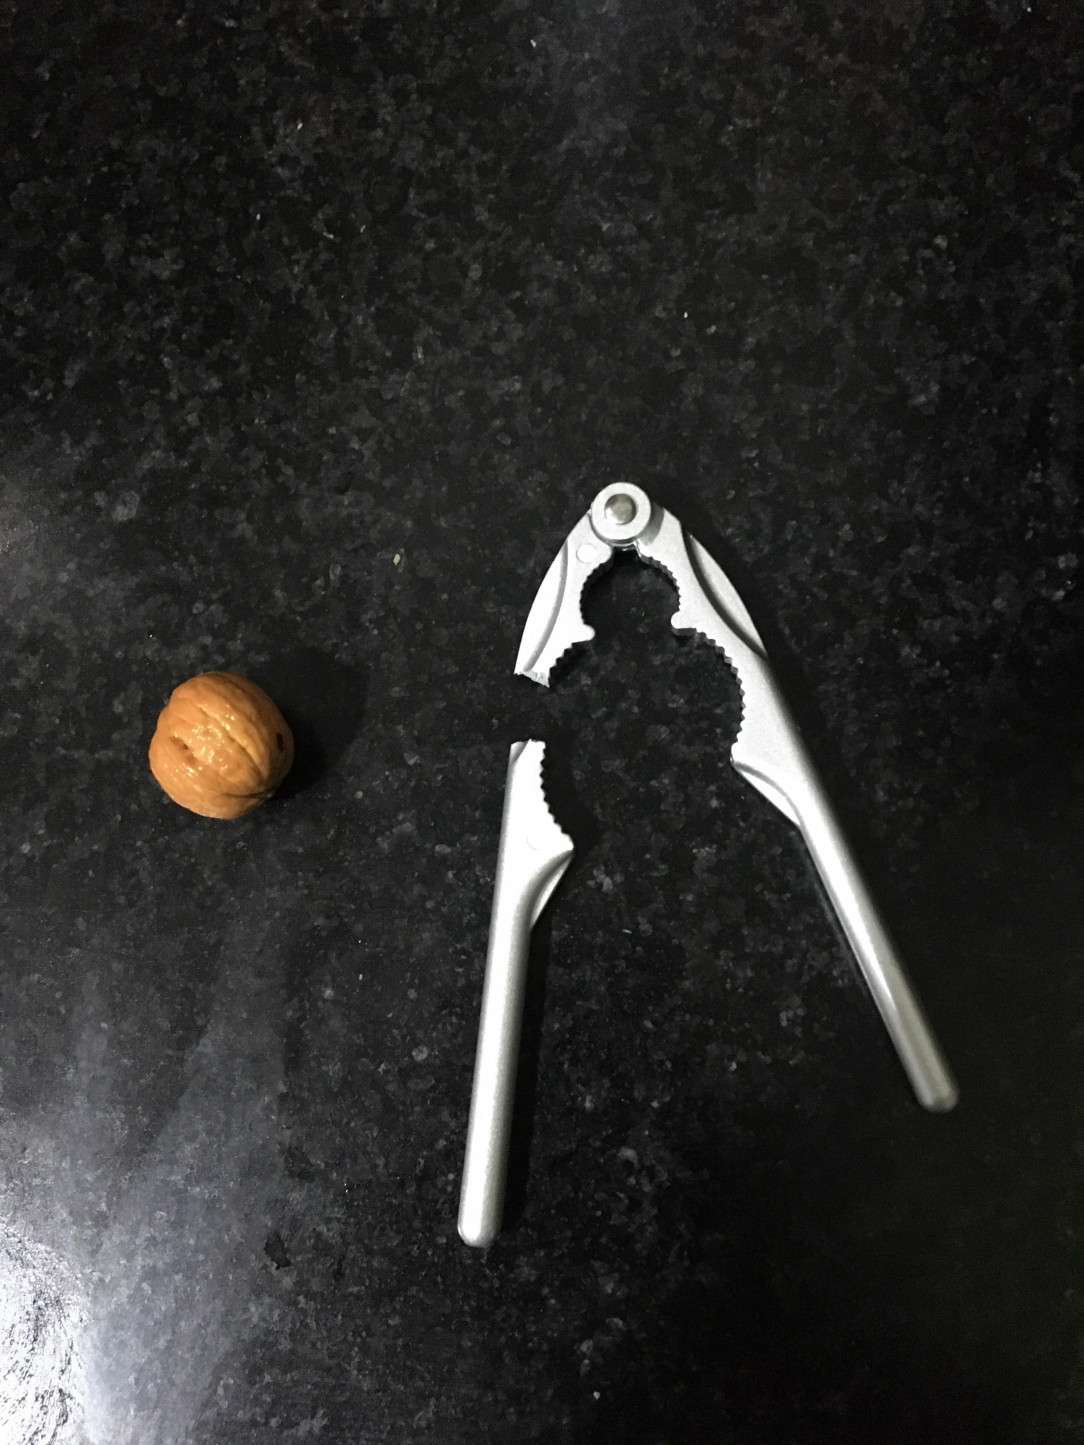 Bought the Walnuts and Nutcracker from local market